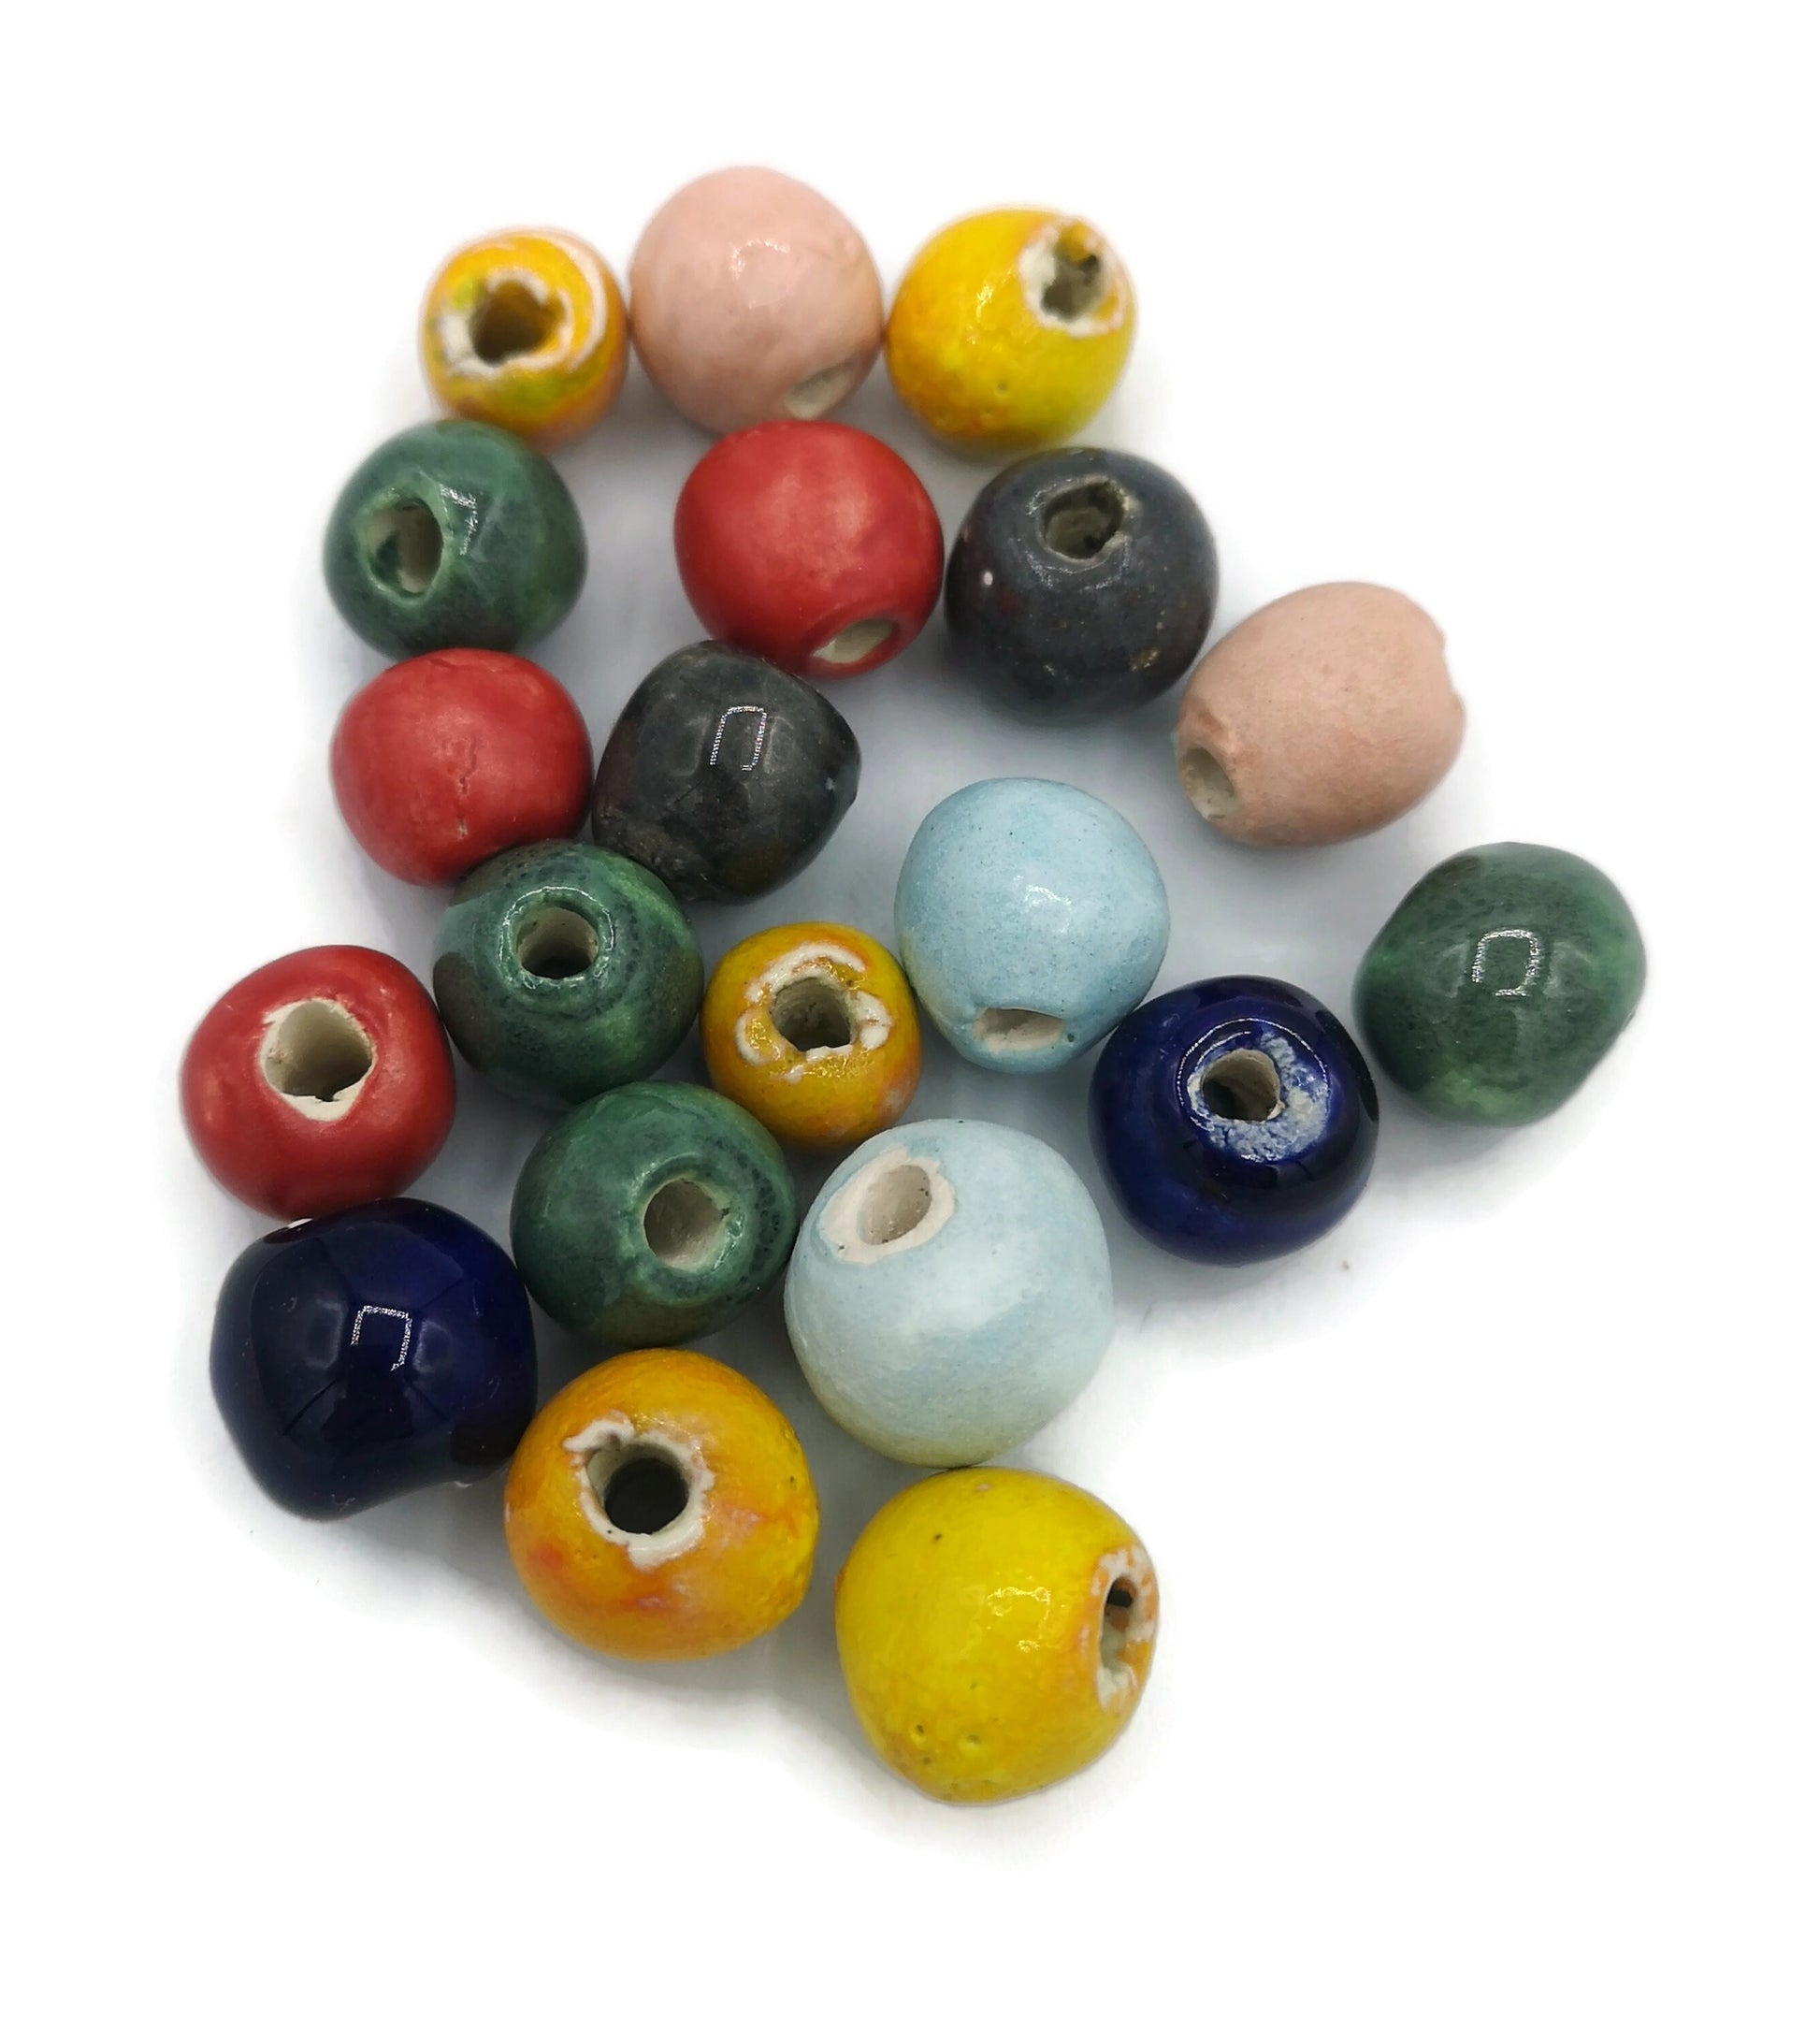 MIXED BEADS, UNIQUE Ceramic Beads, Bubblegum Beads, 20 Pcs Clay Craft Beads Decorative for Jewelry Making, Round Colorful Beads For Macrame - Ceramica Ana Rafael